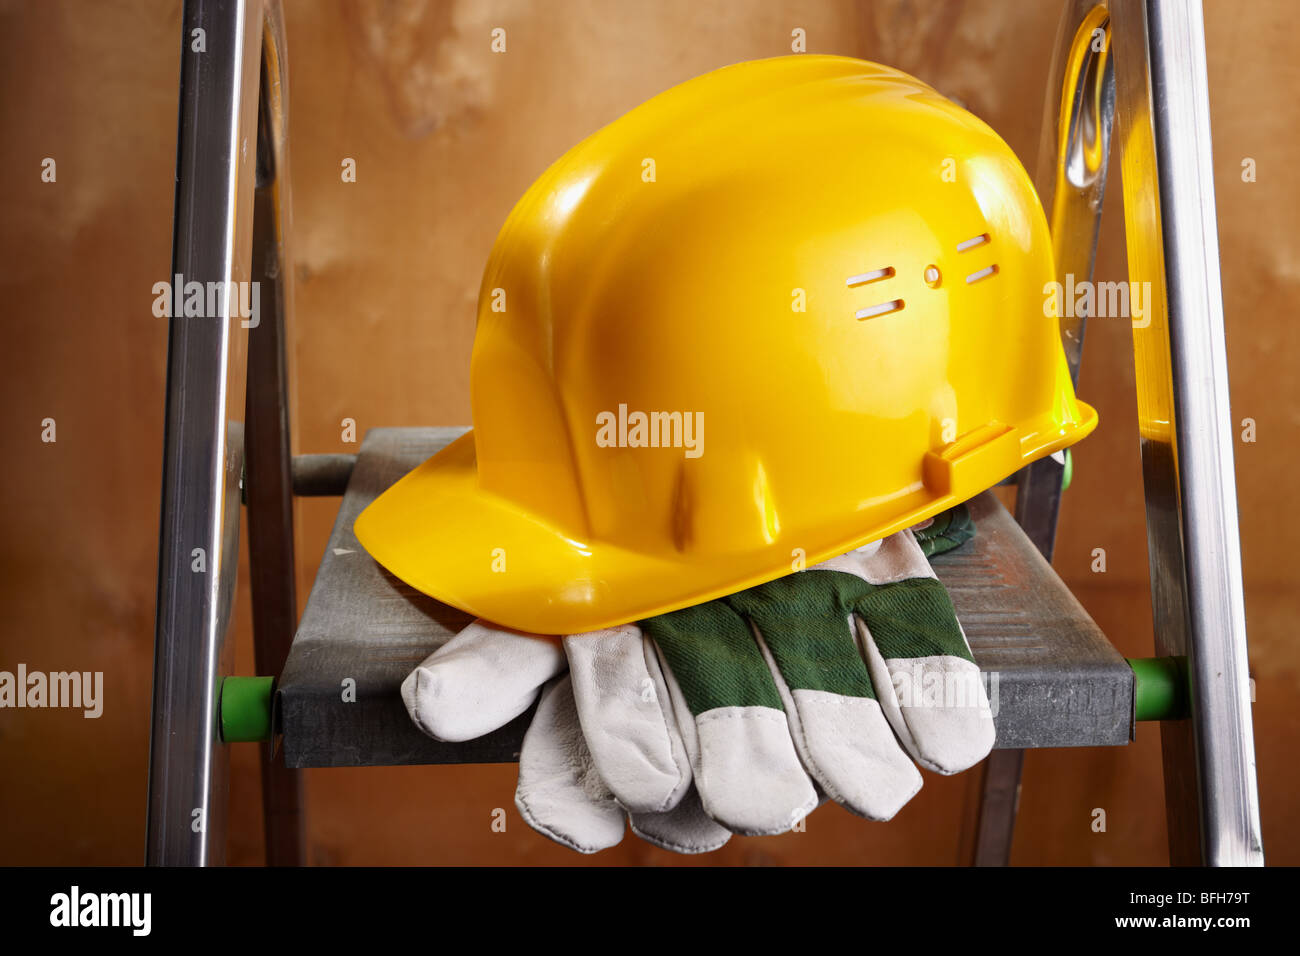 yellow helmet and working gloves on stepladder, selective focus on nearest parts Stock Photo